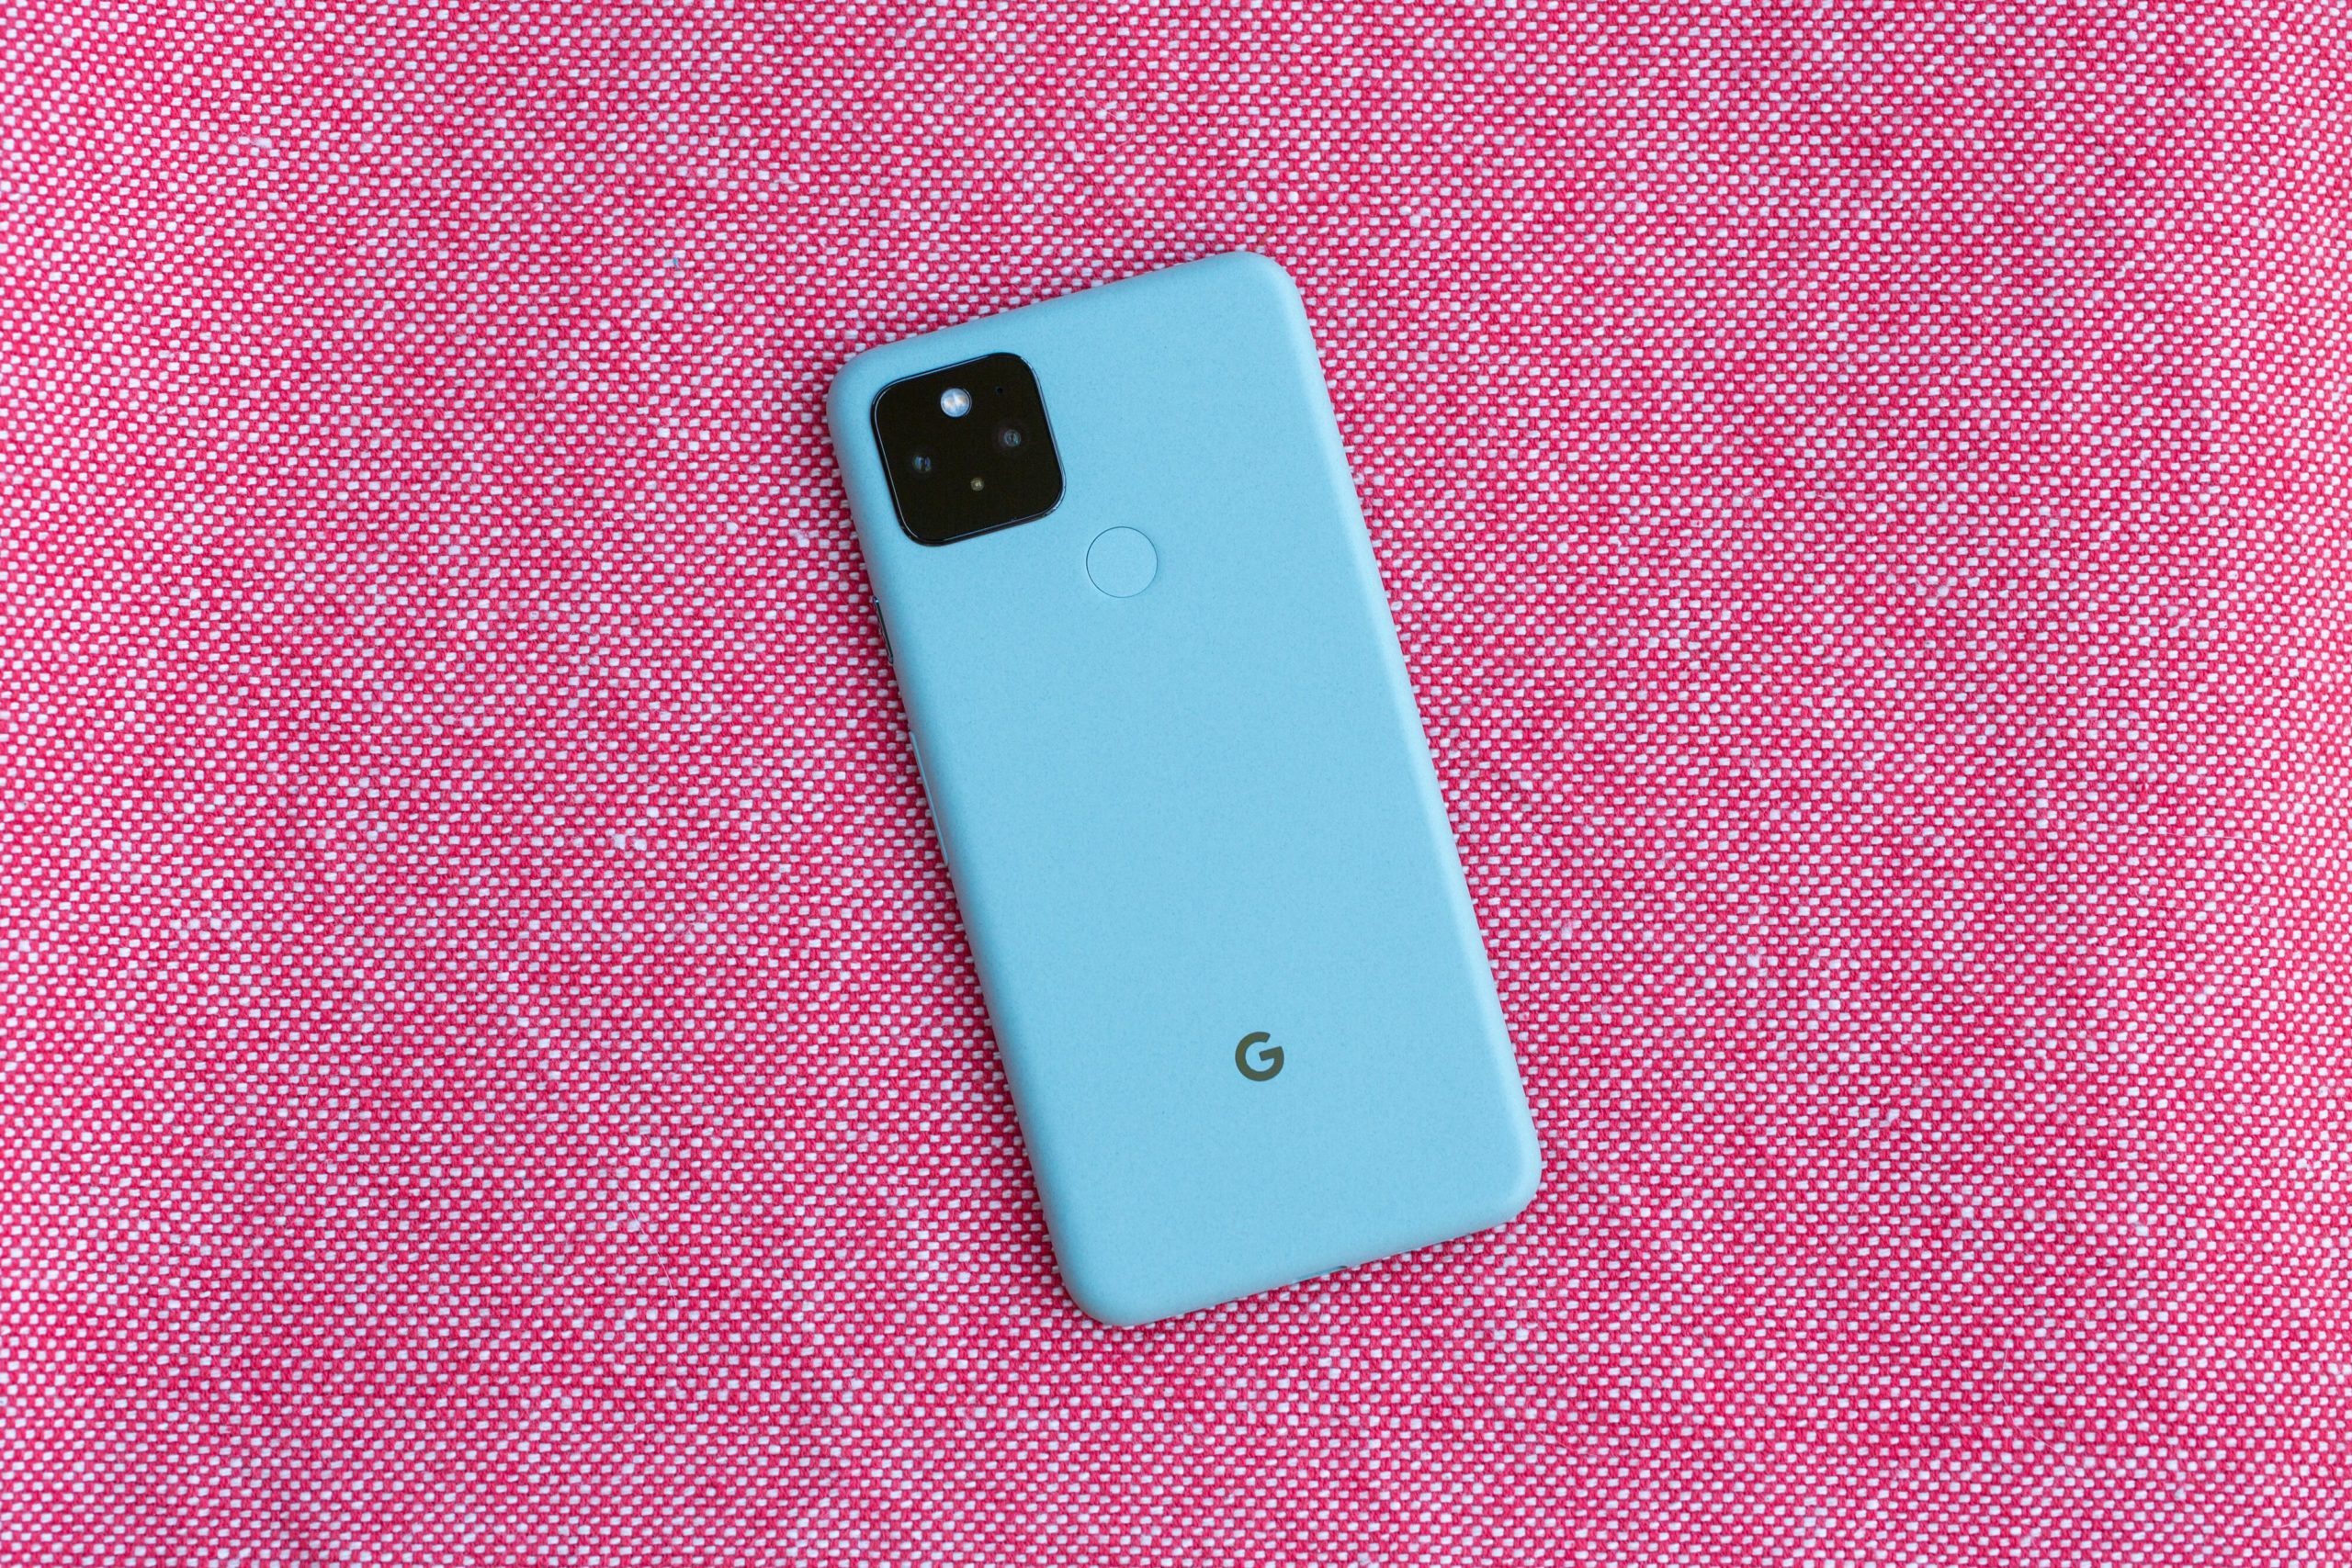 How To clear app data and cache Google Pixel 5